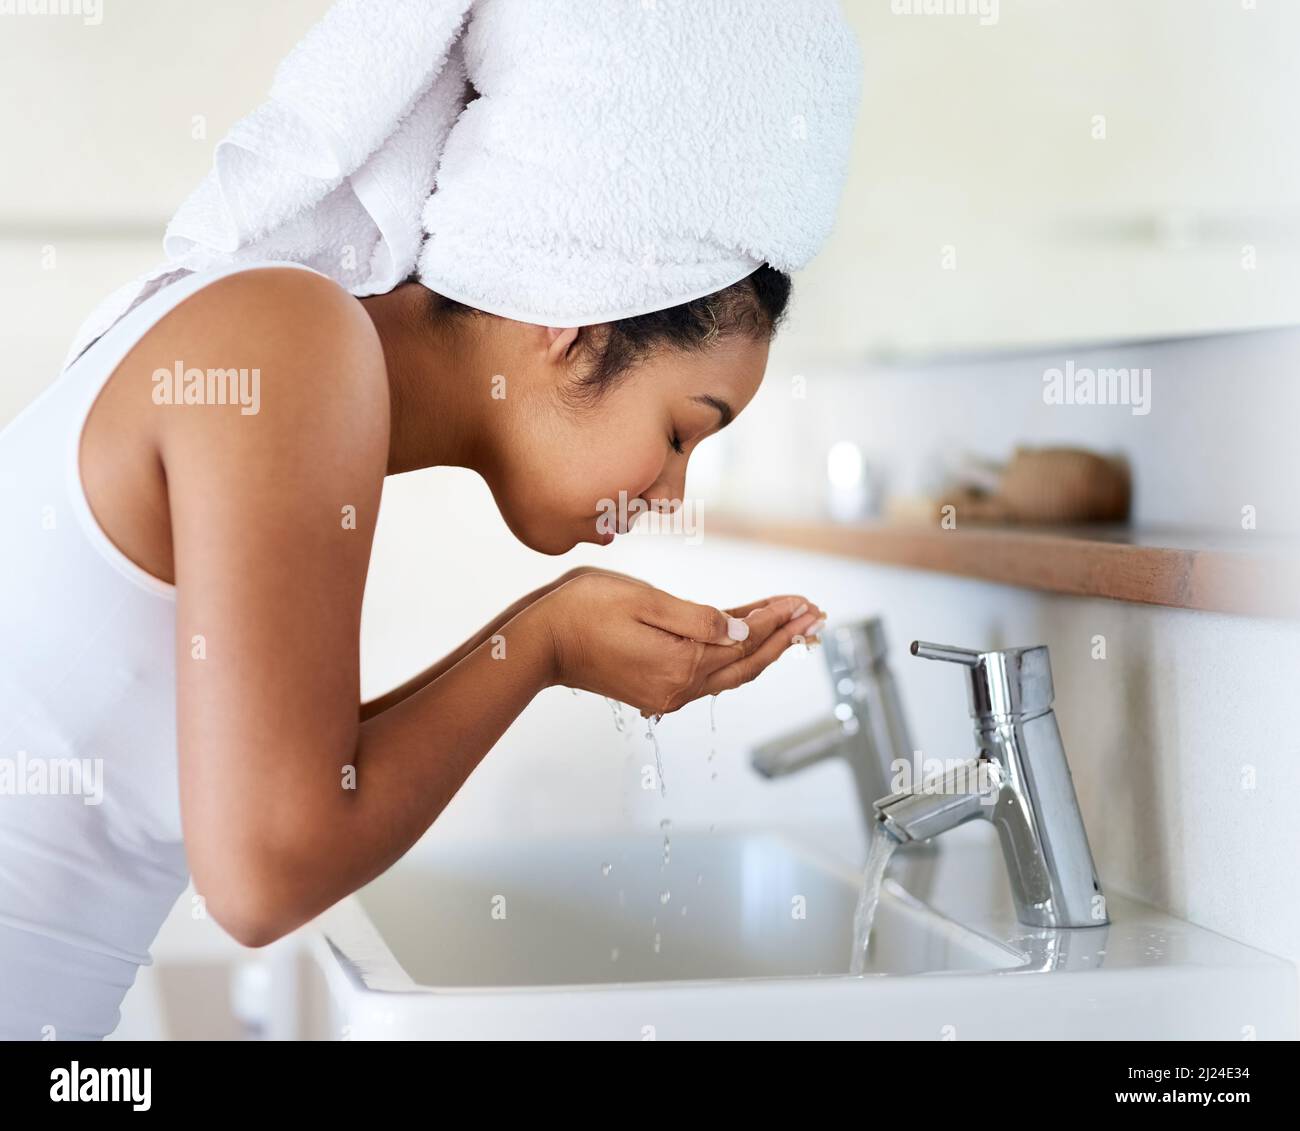 My skin care routine. Shot of a young woman washing her face at the bathroom sink. Stock Photo